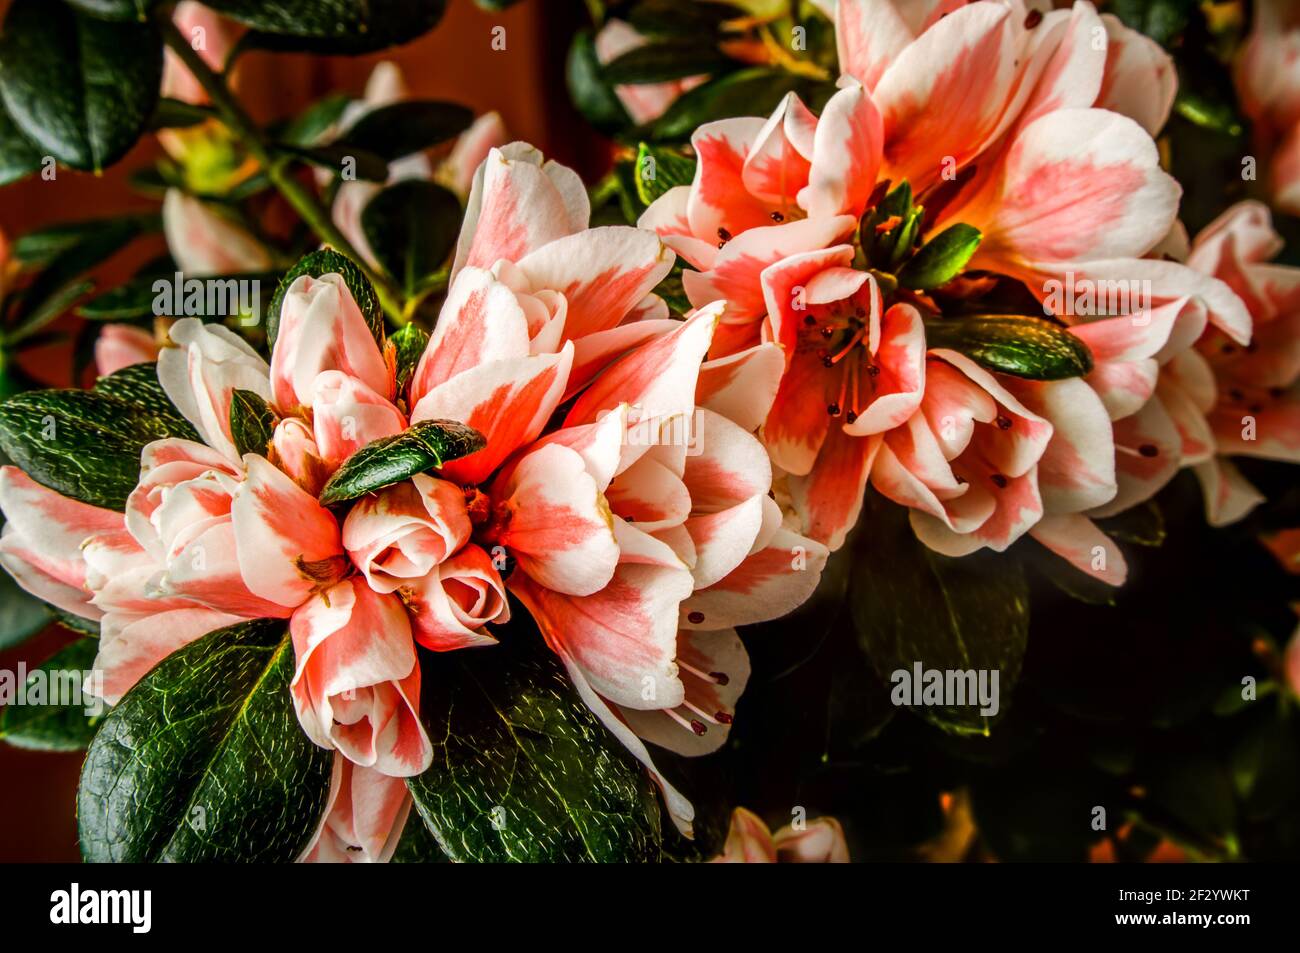 Azalea, Rhododendron, flowers with white and red petals Stock Photo